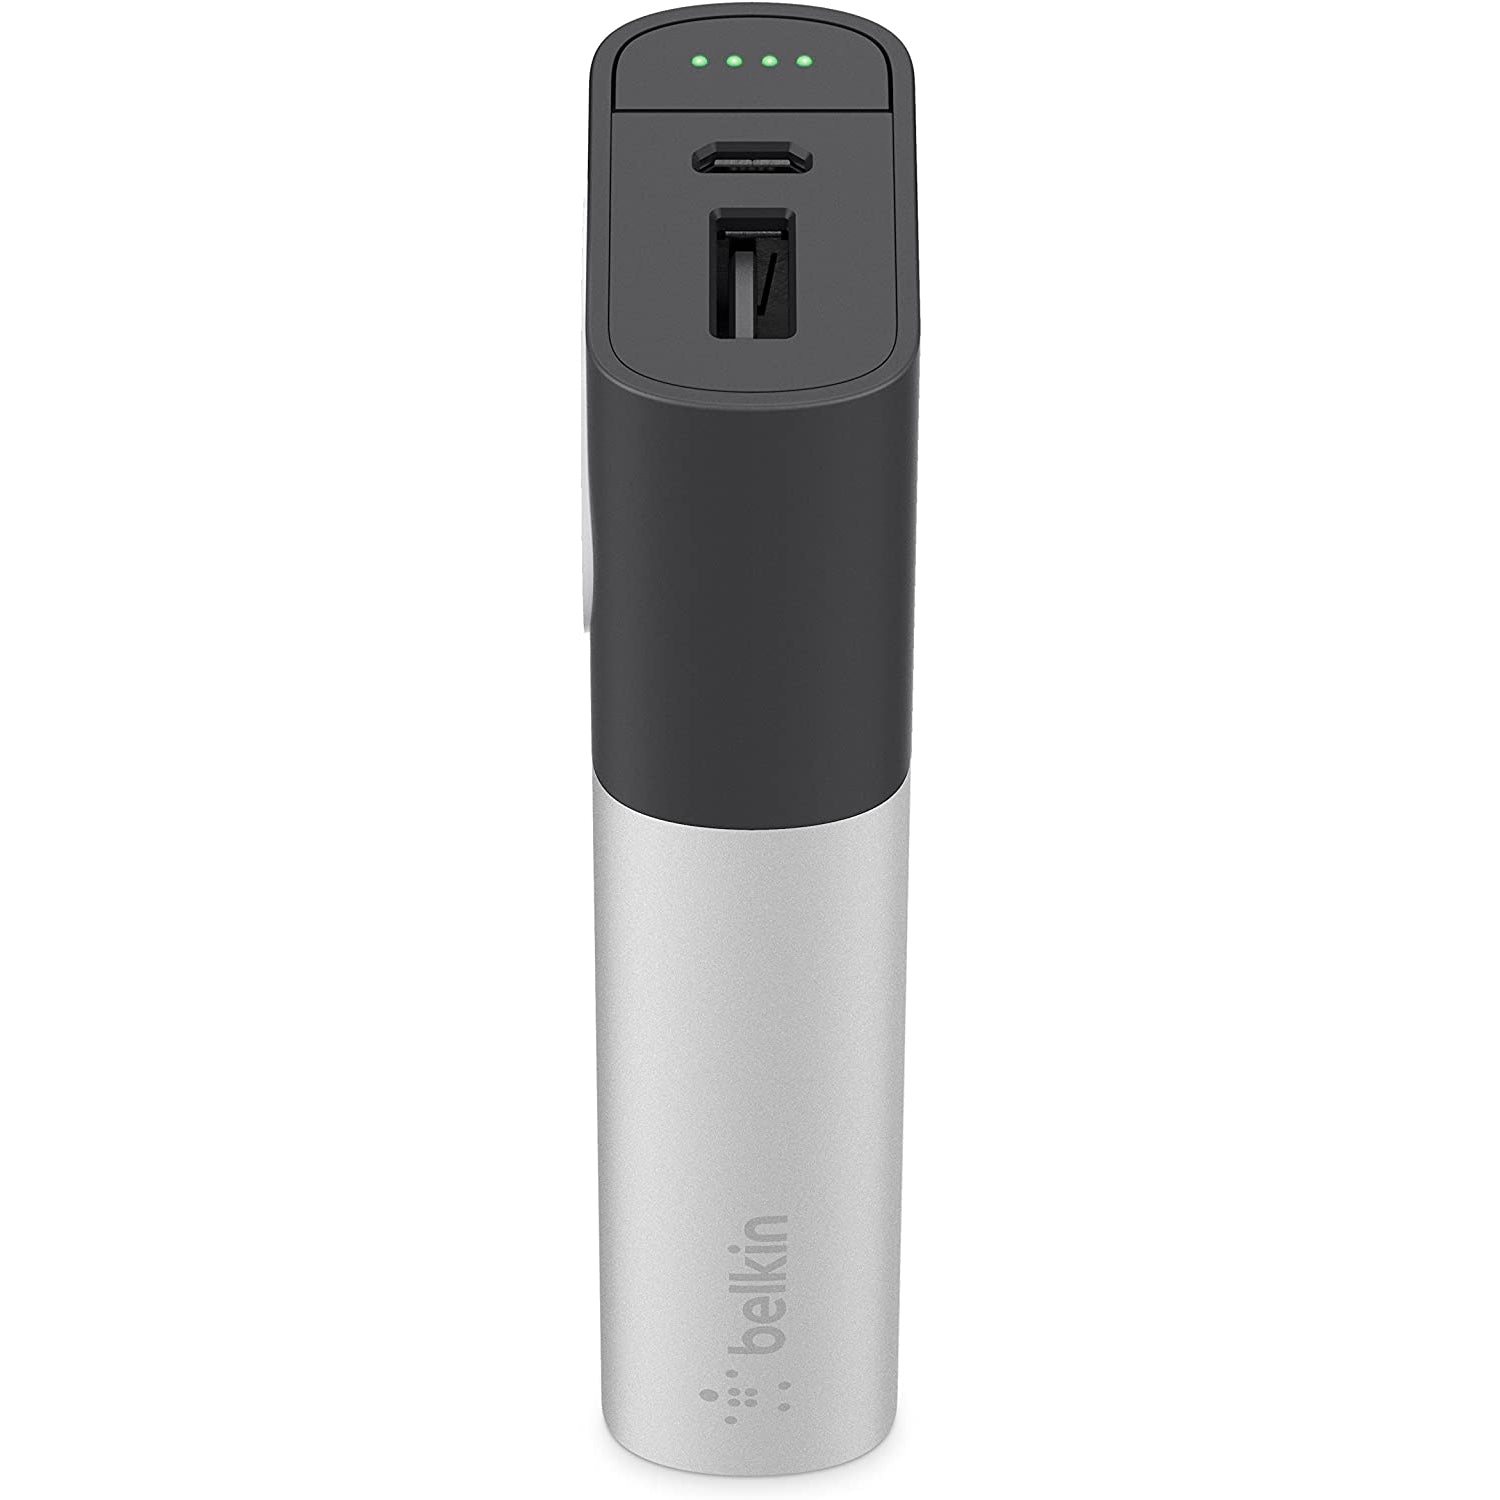 Belkin Valet Charger Power Pack 6700mAh - Dual Apple Watch and iPhone